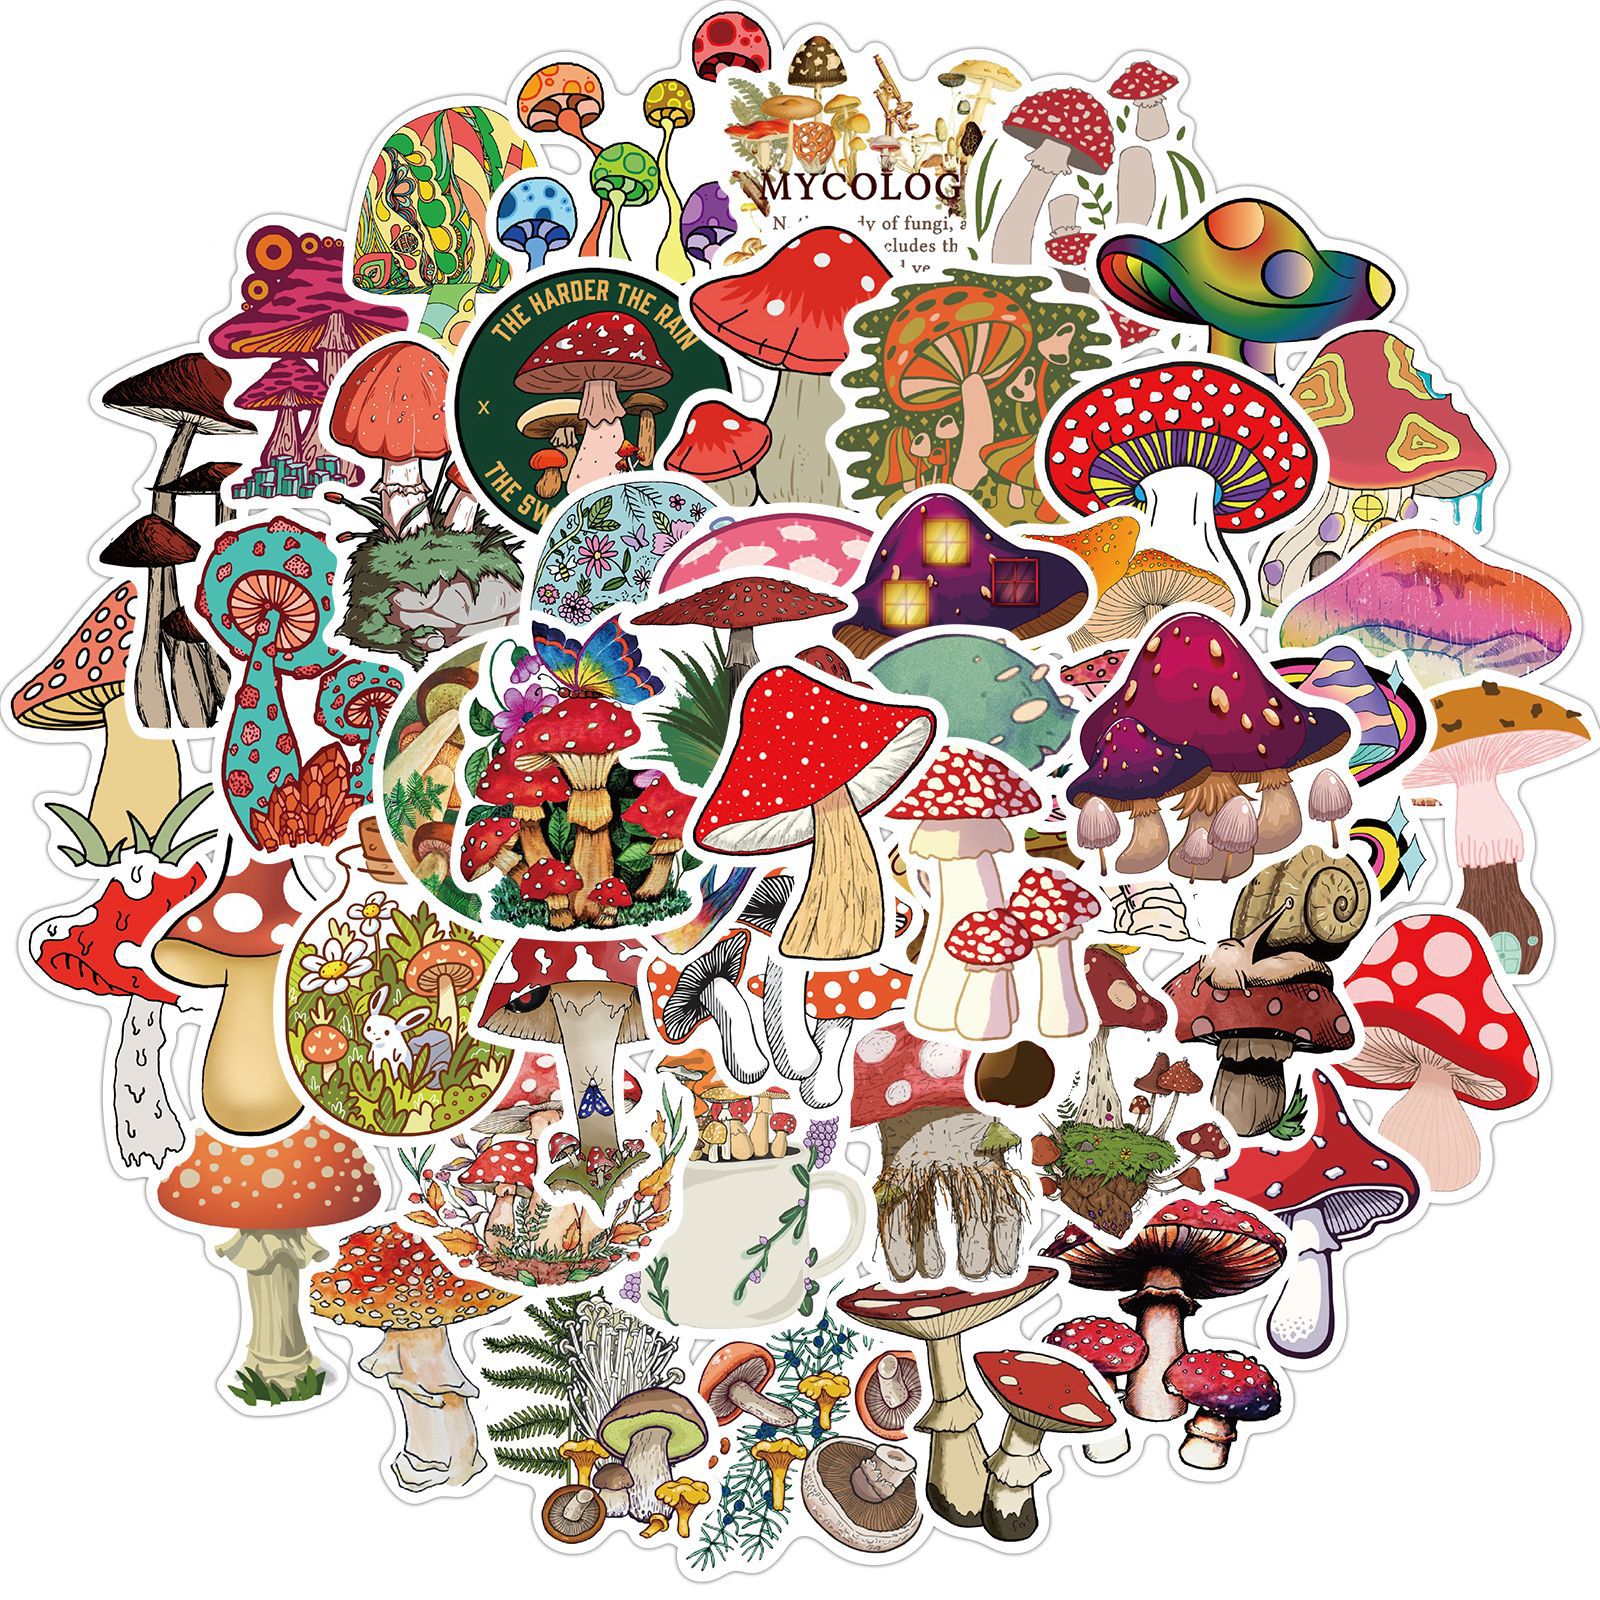 ful Mushroom Vinyl Cute Stickers For Journal Waterproof For Water Bottles,  Laptops, Planners, Scrapbooking, Wall, Skateboards, Boxes, And Graffiti  Decals From Homezy, $2.23